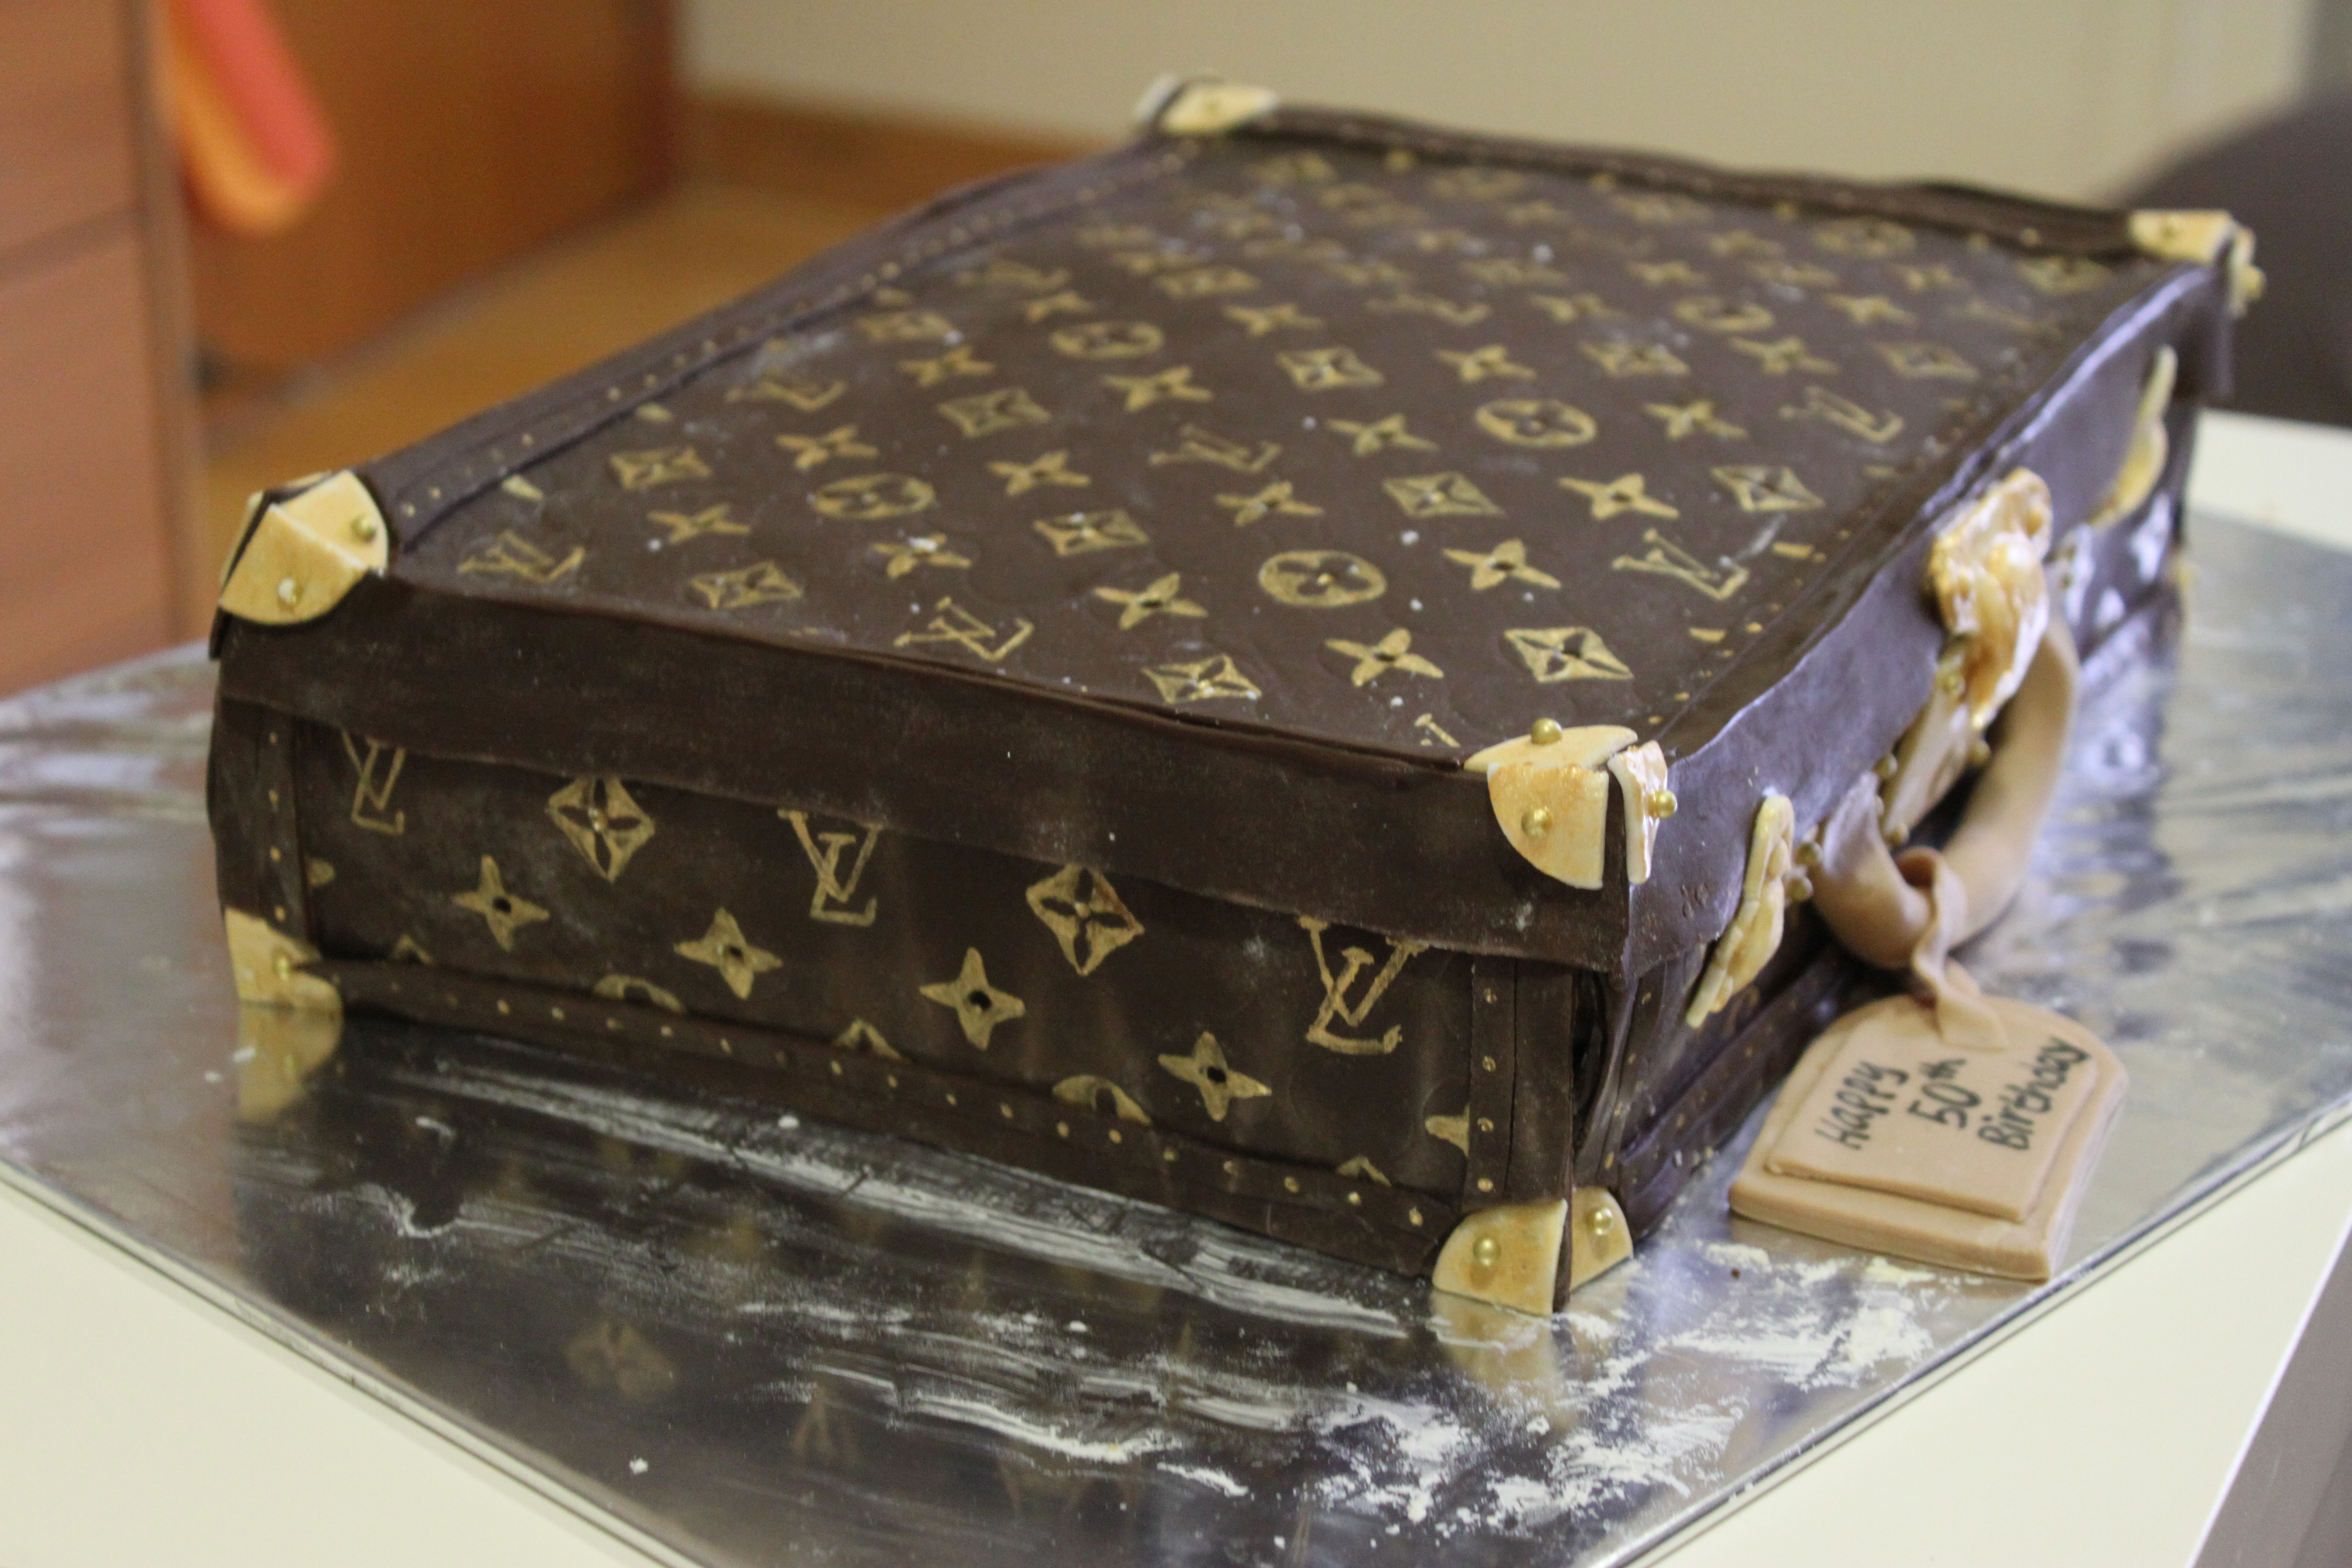 LOUIS VUITTON Suitcase Cake - Decorated Cake by D Cake - CakesDecor